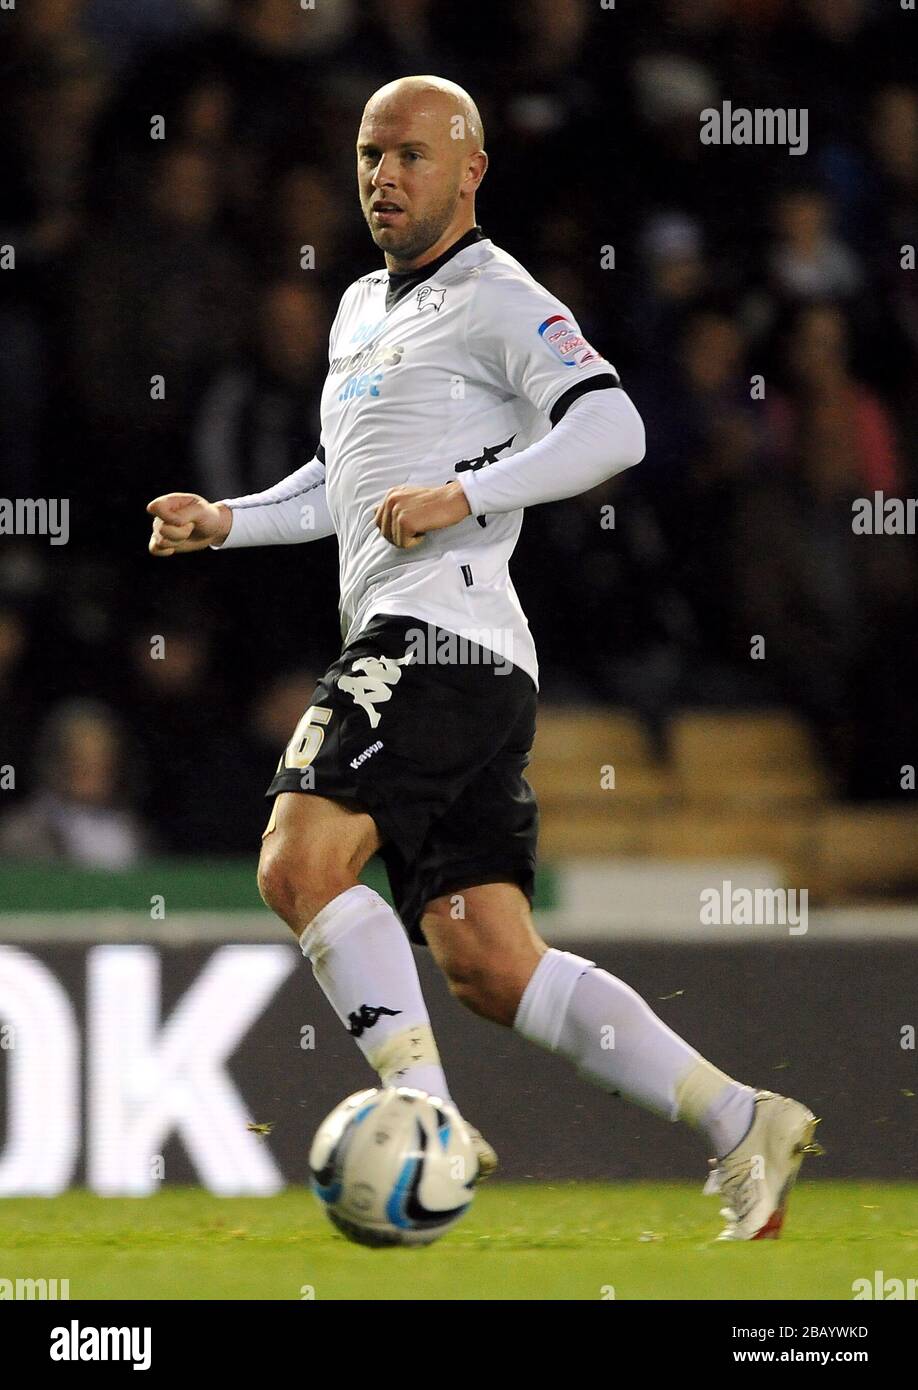 James O'Connor, Derby County Stock Photo - Alamy